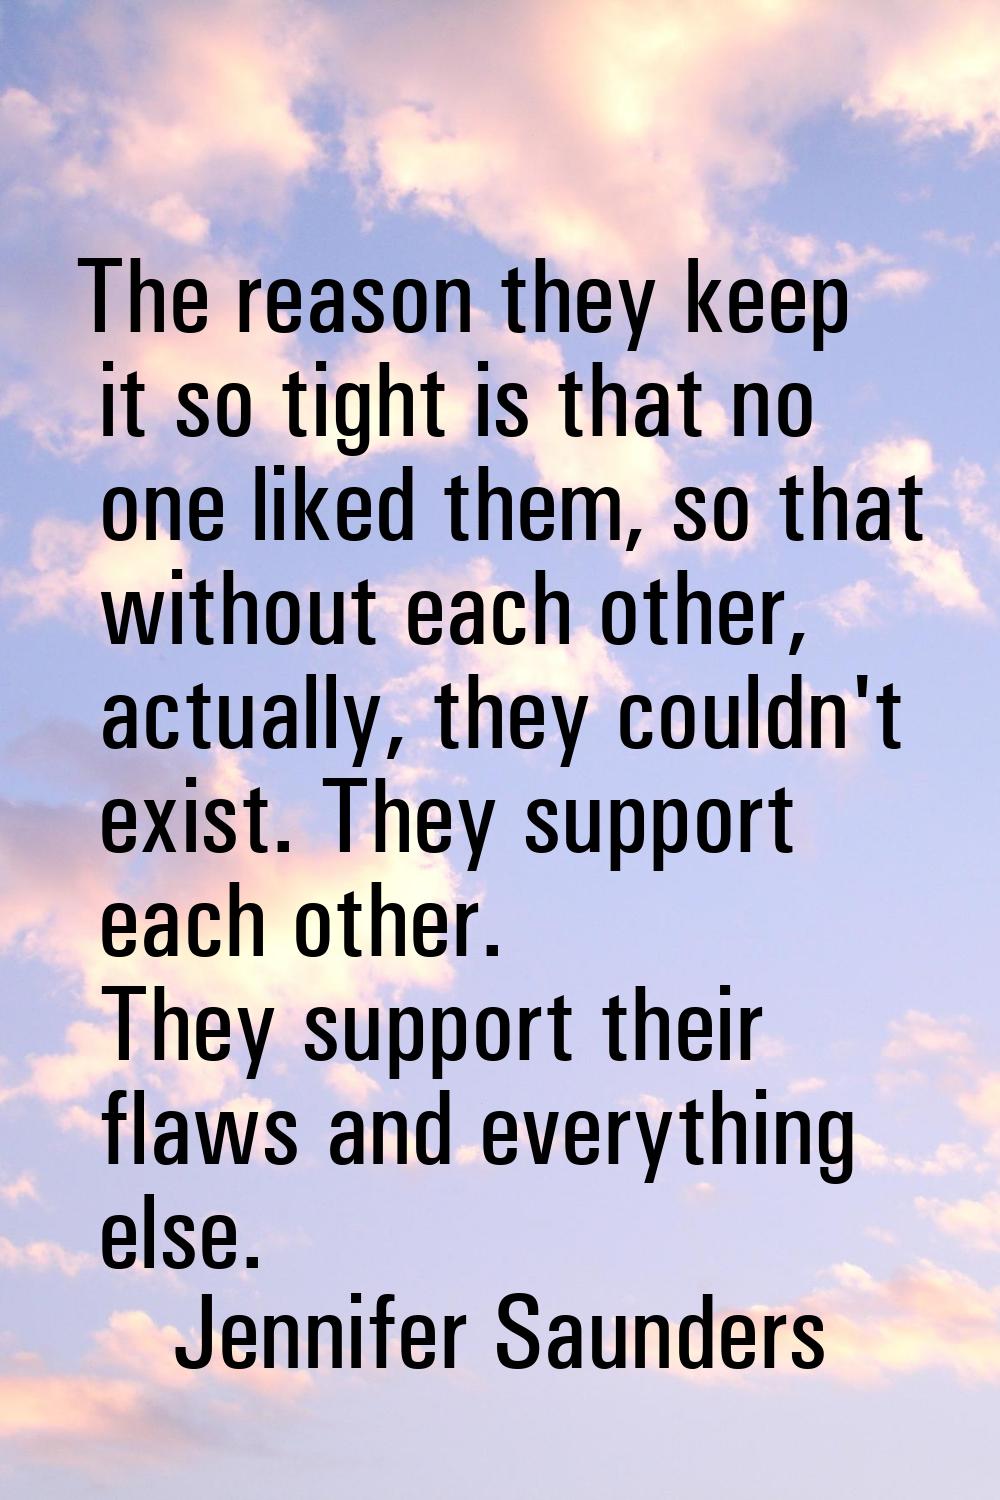 The reason they keep it so tight is that no one liked them, so that without each other, actually, t